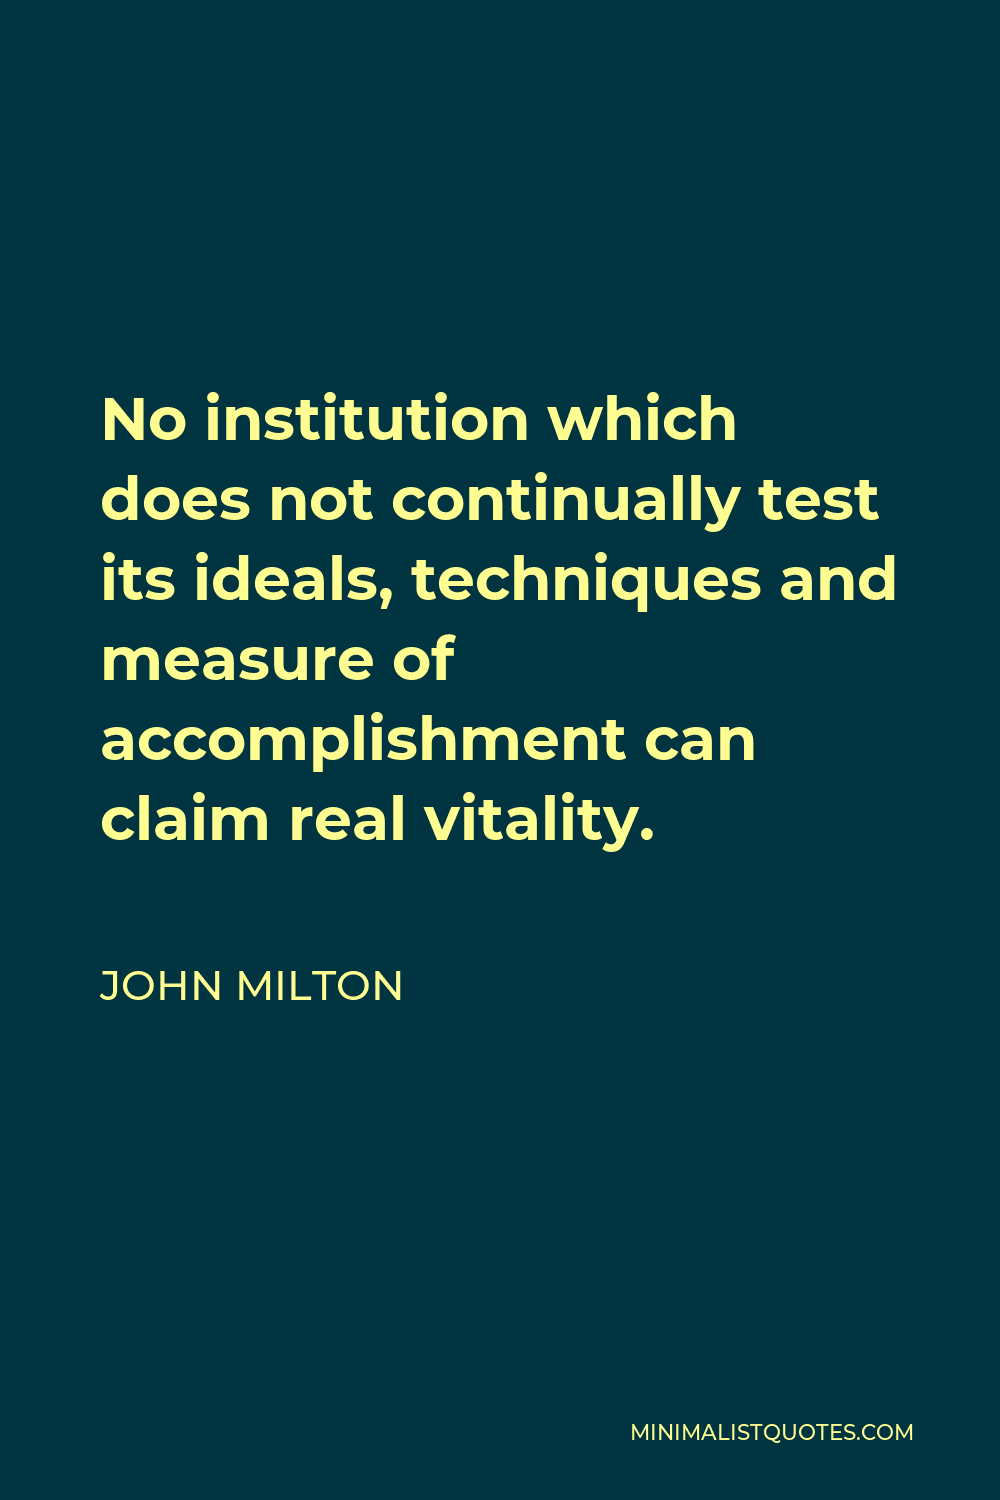 John Milton Quote - No institution which does not continually test its ideals, techniques and measure of accomplishment can claim real vitality.